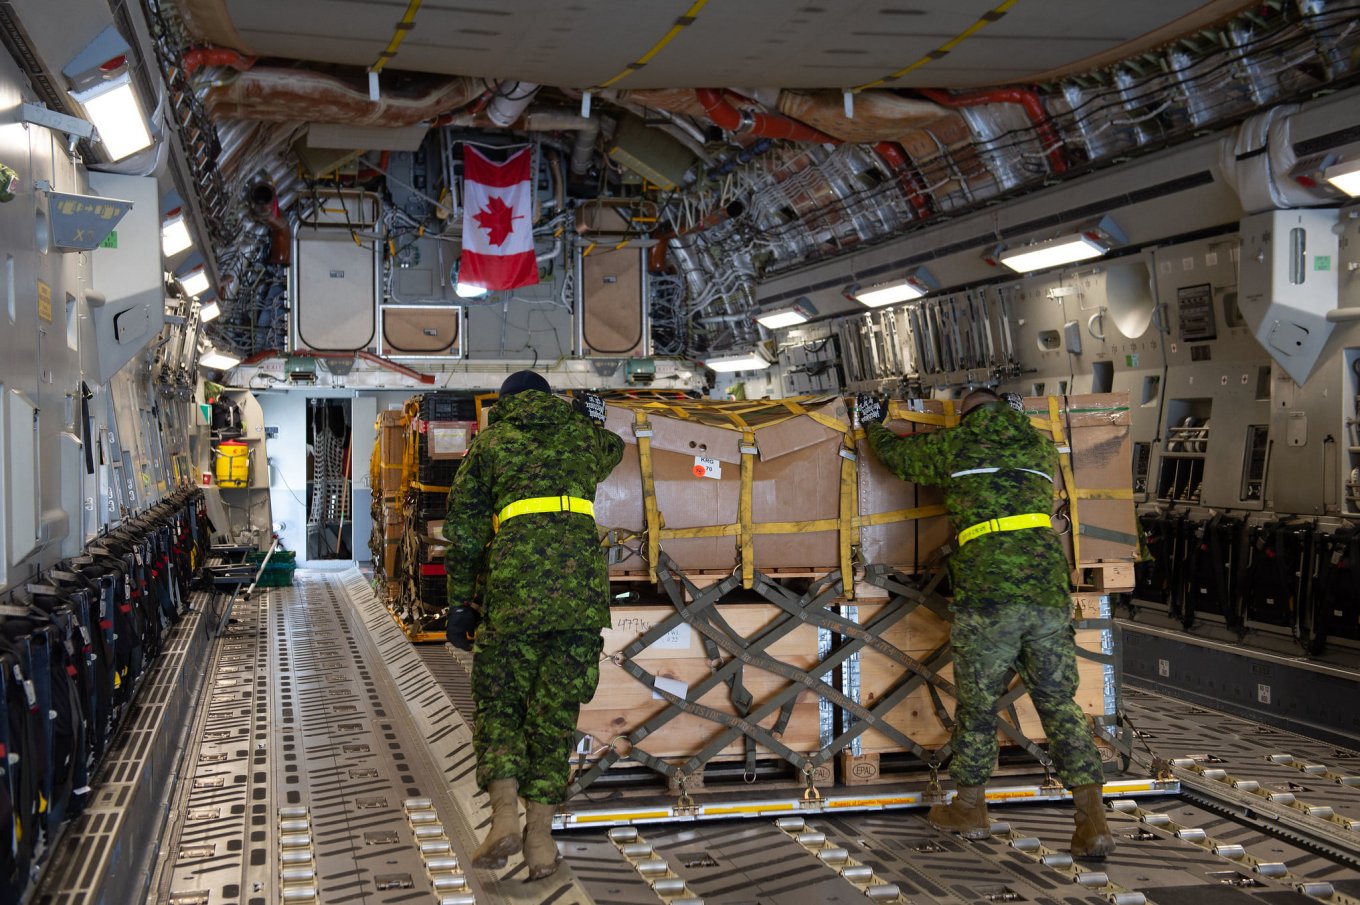 Canada Sends Non-Lethal Military Aid, Instructors to Further Support Ukraine, Defense Express